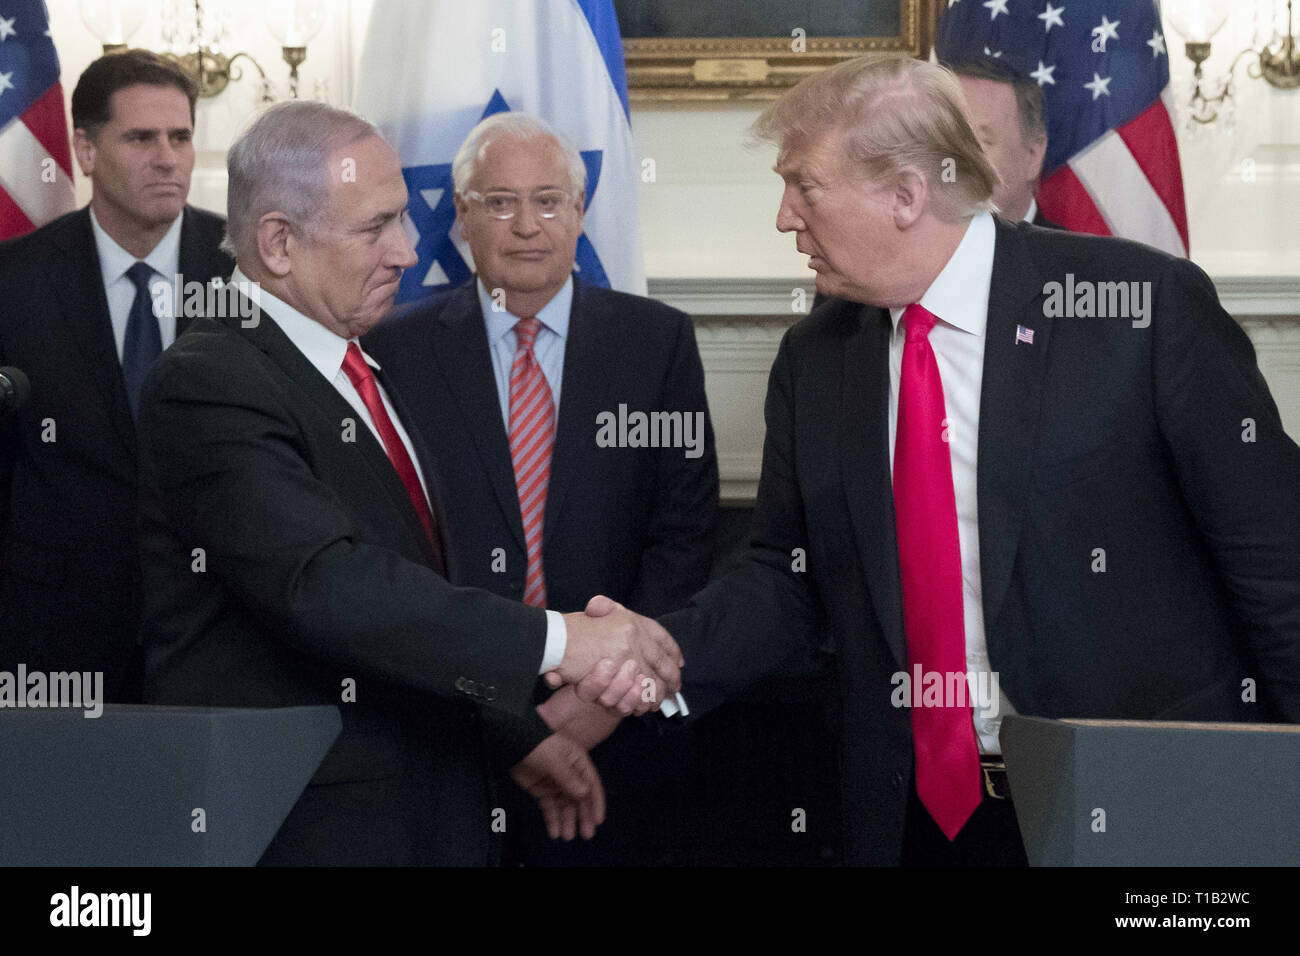 Washington, District of Columbia, USA. 25th Mar, 2019. Prime Minister of Israel Benjamin Netanyahu (Front L) and US President Donald J. Trump (Front R) shake hands before Trump signed an order recognizing Golan Heights as Israeli territory, in the Diplomatic Reception Room of the White House in Washington, DC, USA, 25 March 2019 Credit: Michael Reynolds/CNP/ZUMA Wire/Alamy Live News Stock Photo